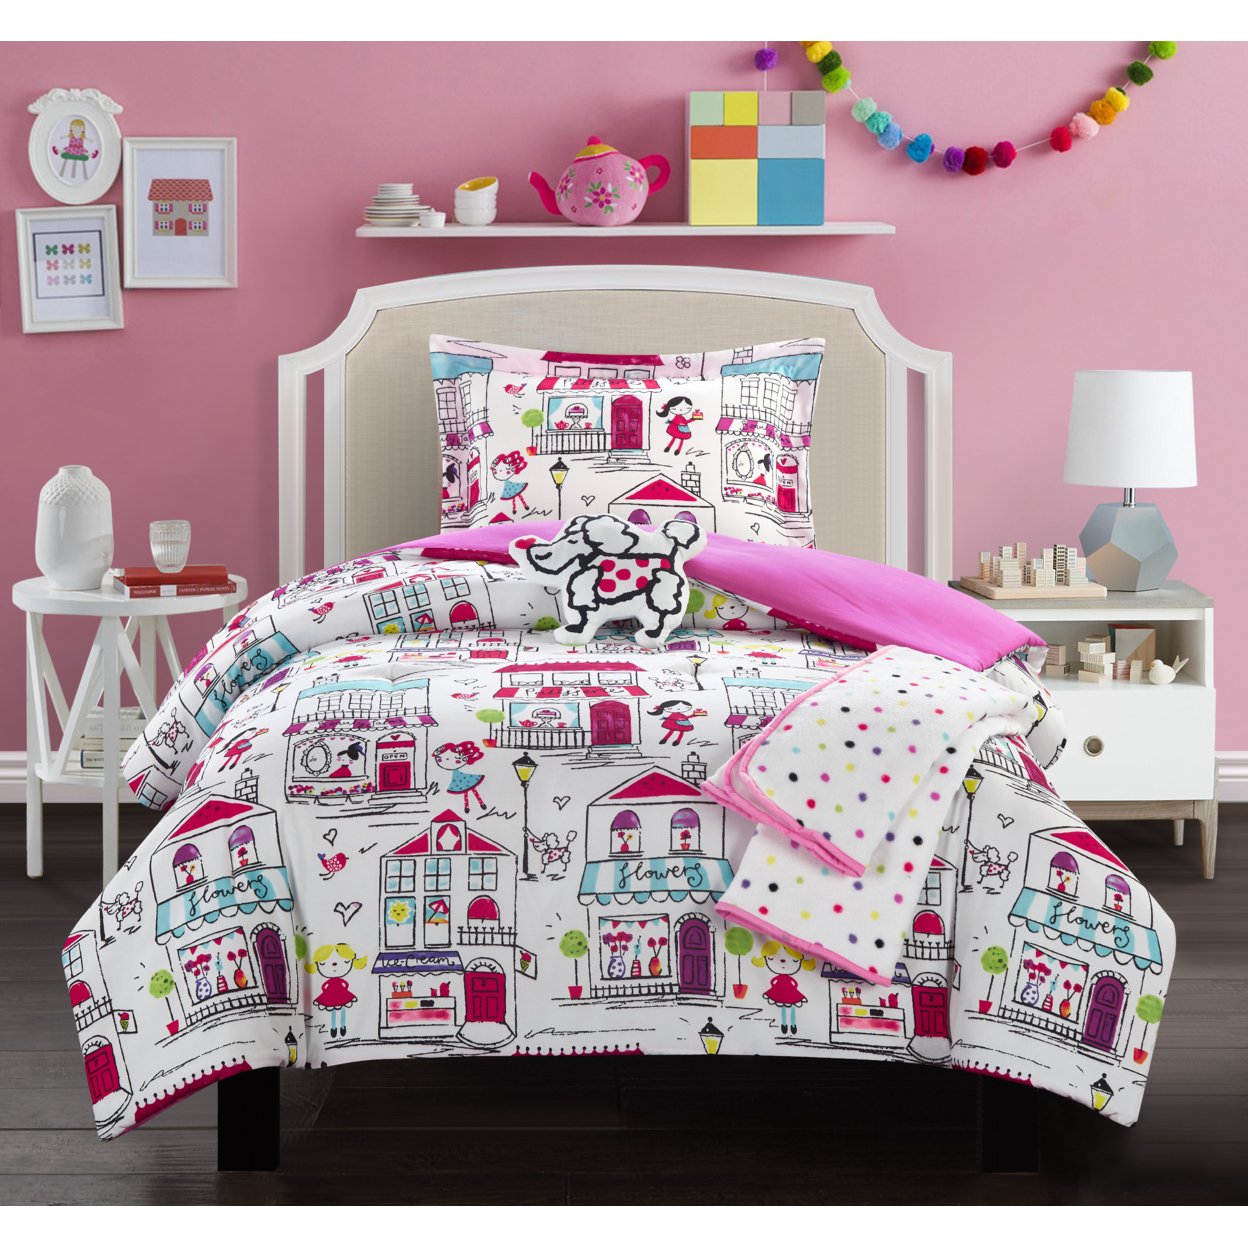 5 Or 4 Piece Comforter Set Youth Design Bedding - Throw Blanket Decorative Pillow Shams Included - Hot Pink, Full